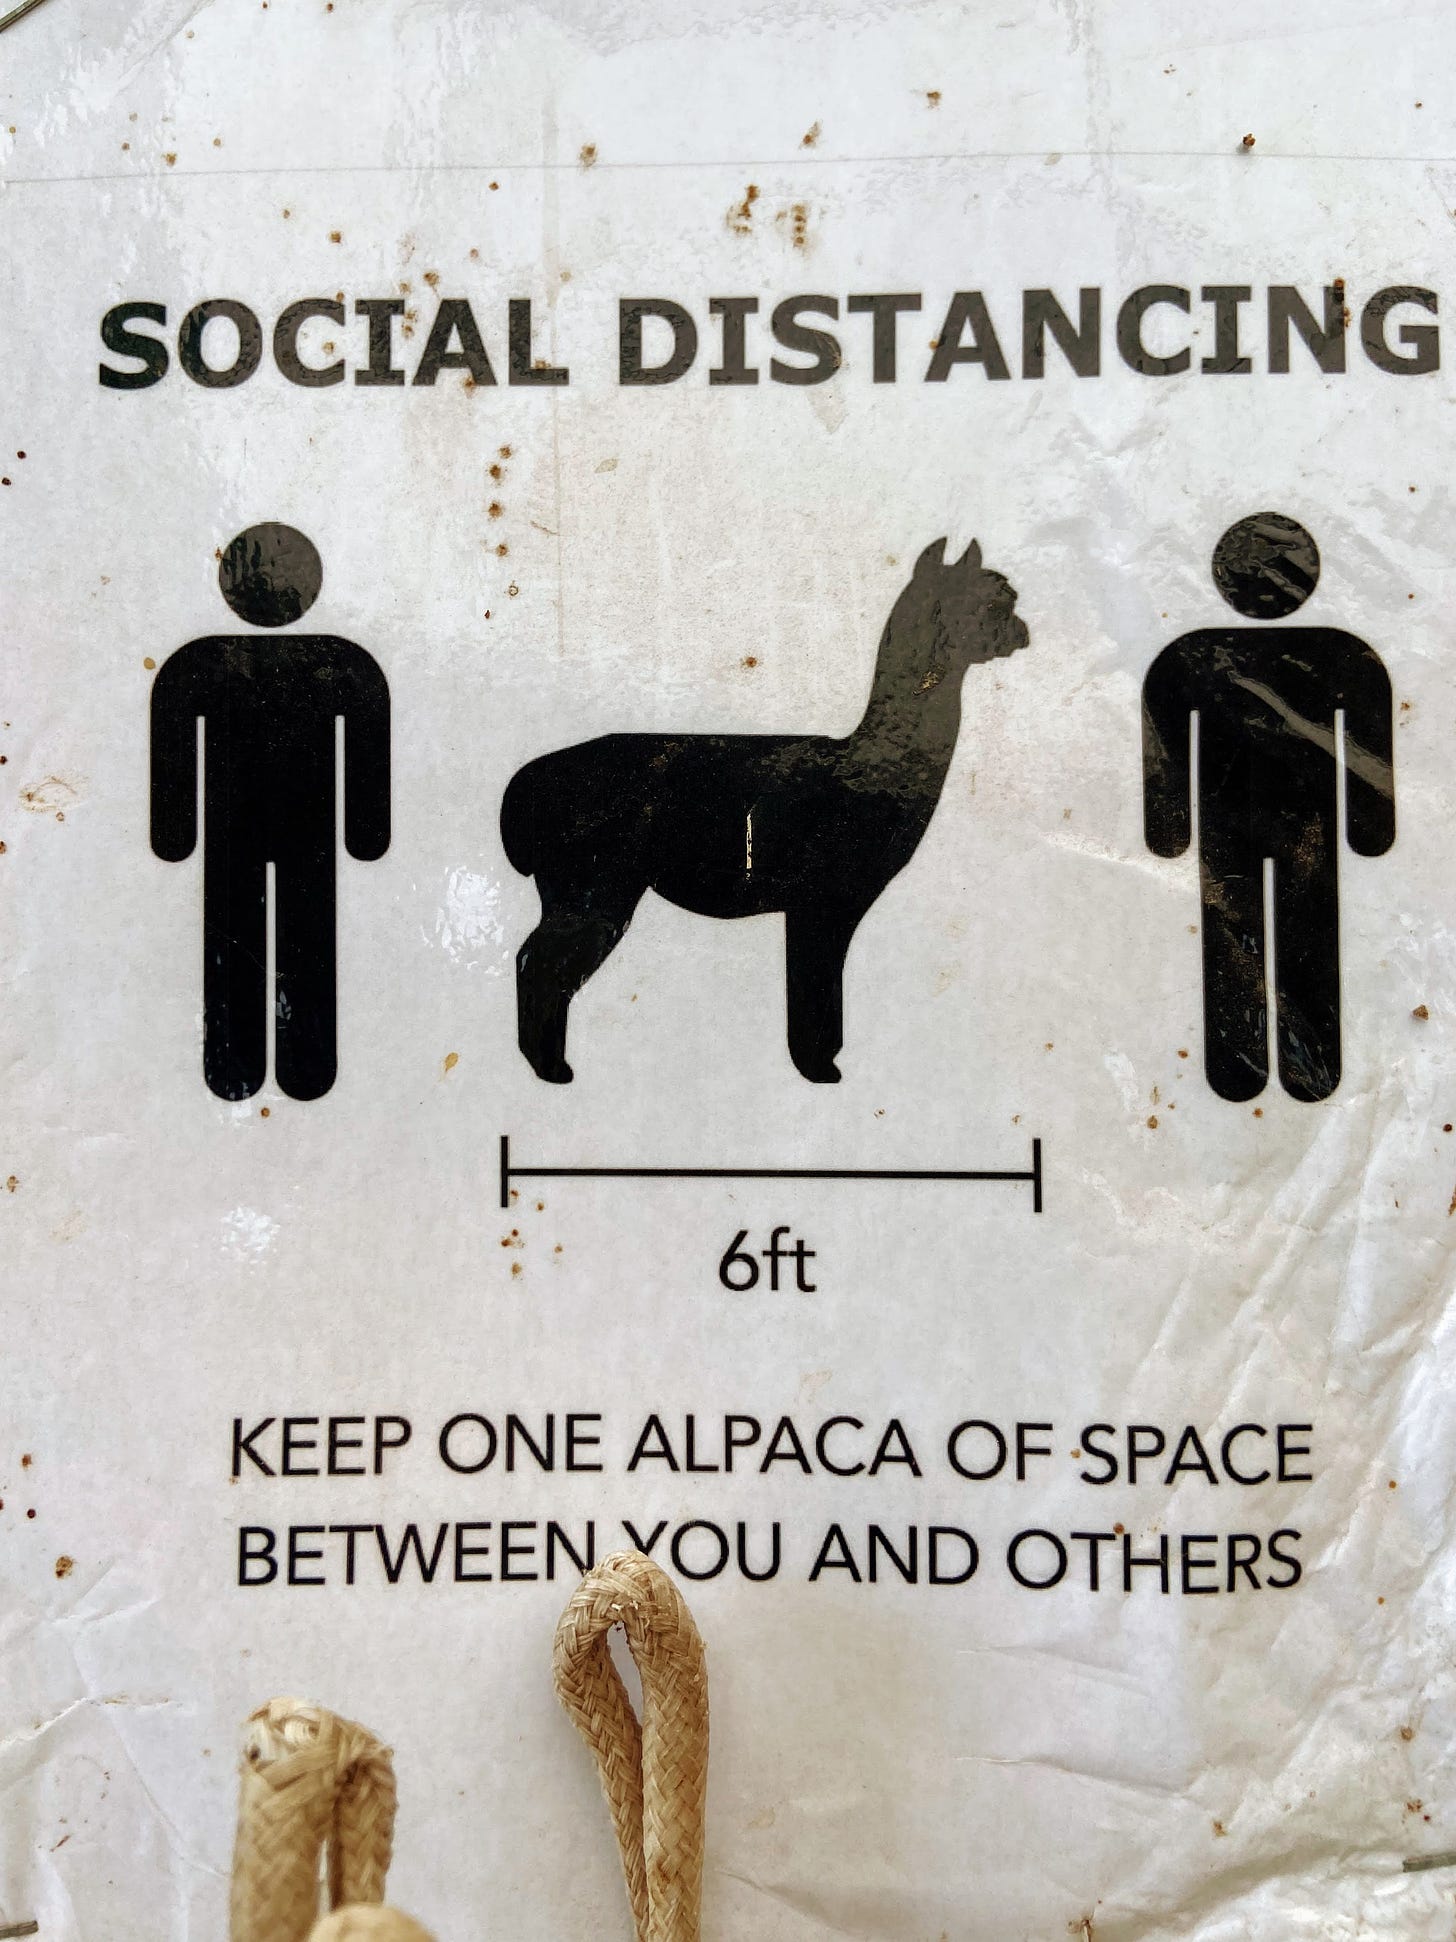 social distancing sign: "keep one alpaca of space between you and others"